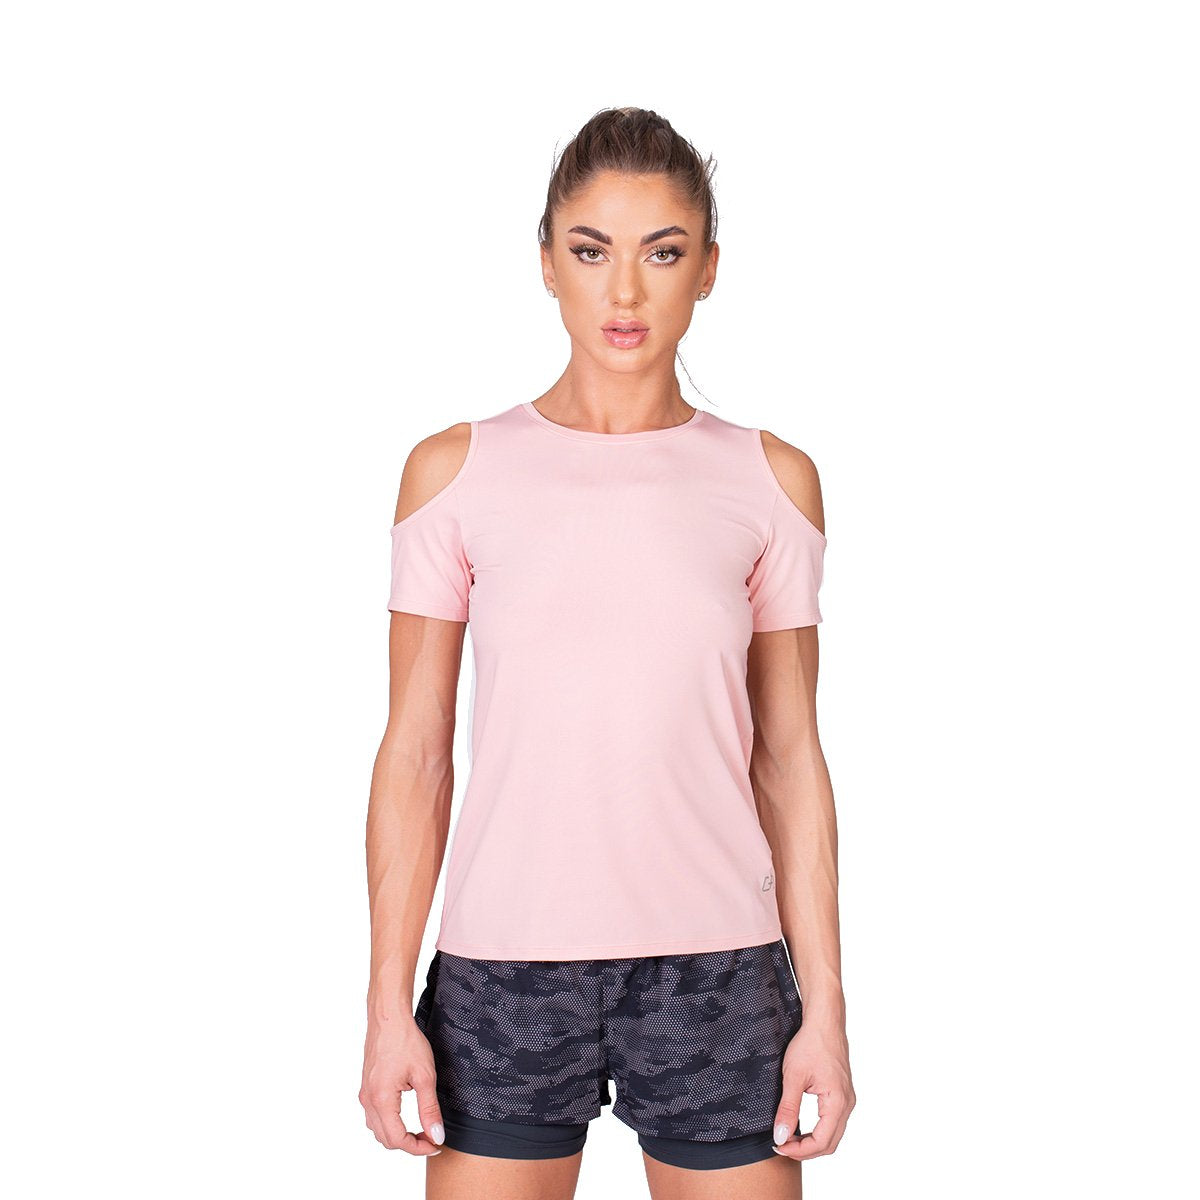 Training Loose-Fit T-Shirt for Women